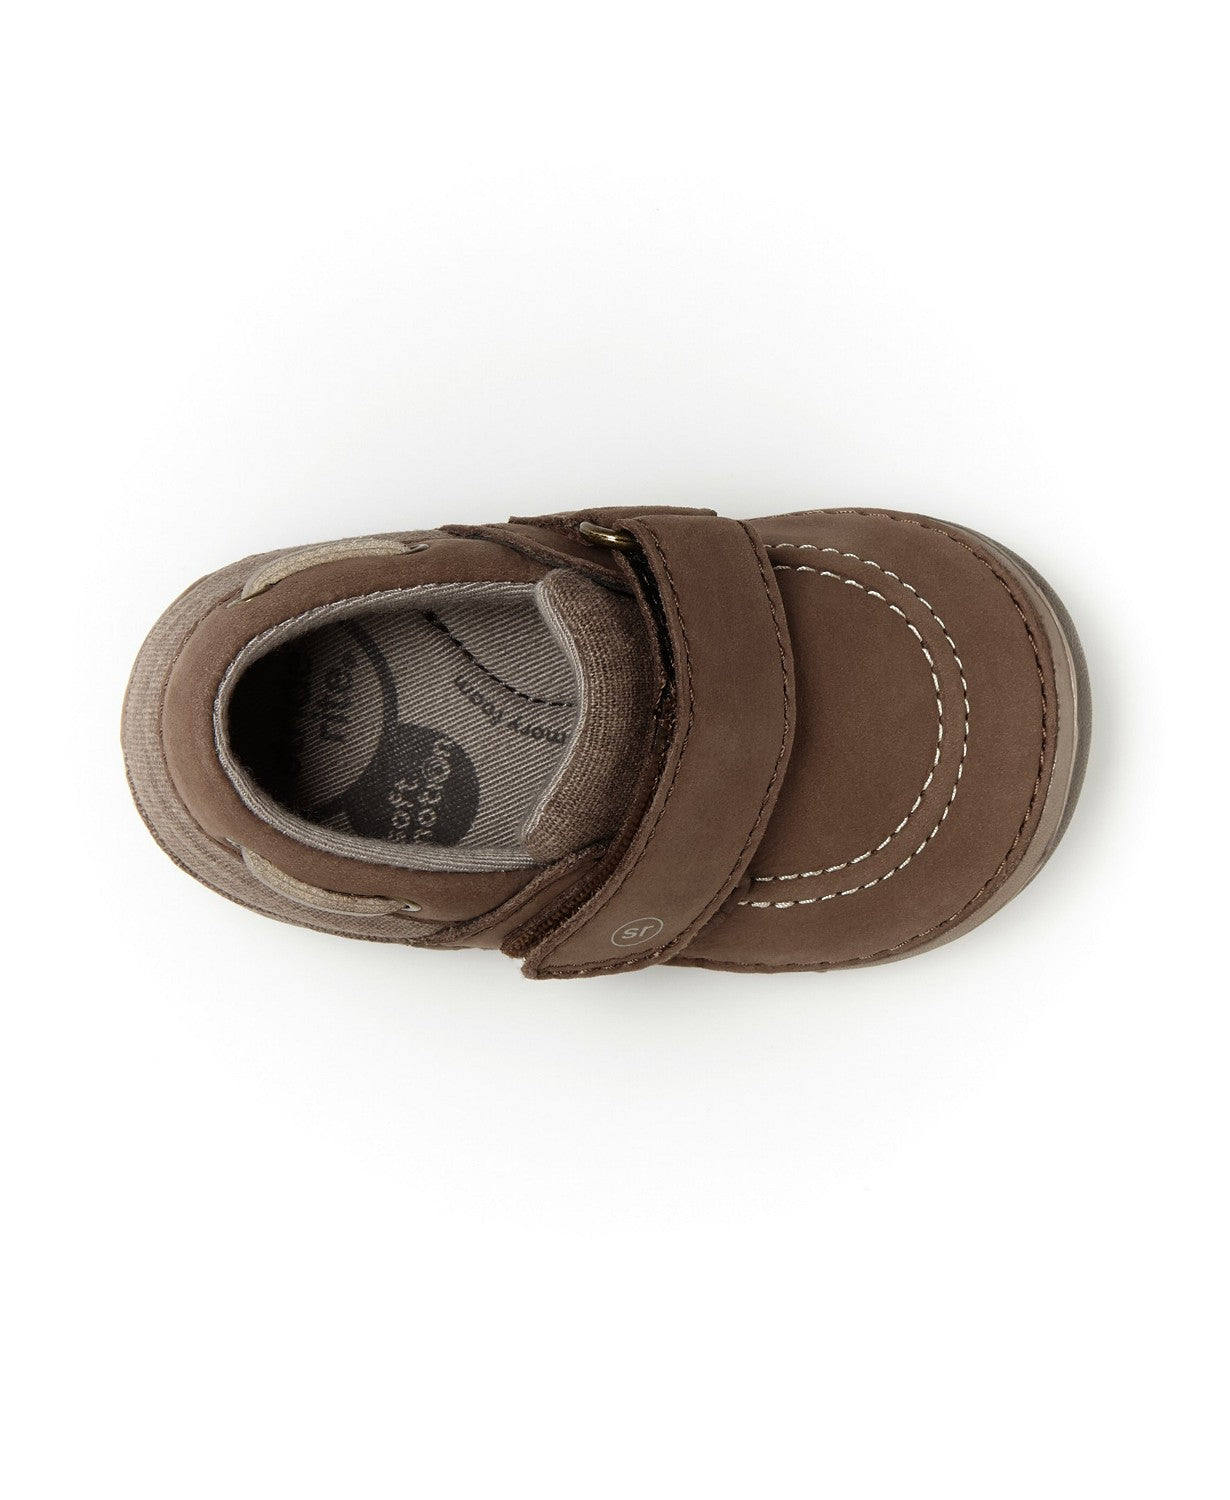 Soft Motion Wally Loafer Shoe - Brown Leather